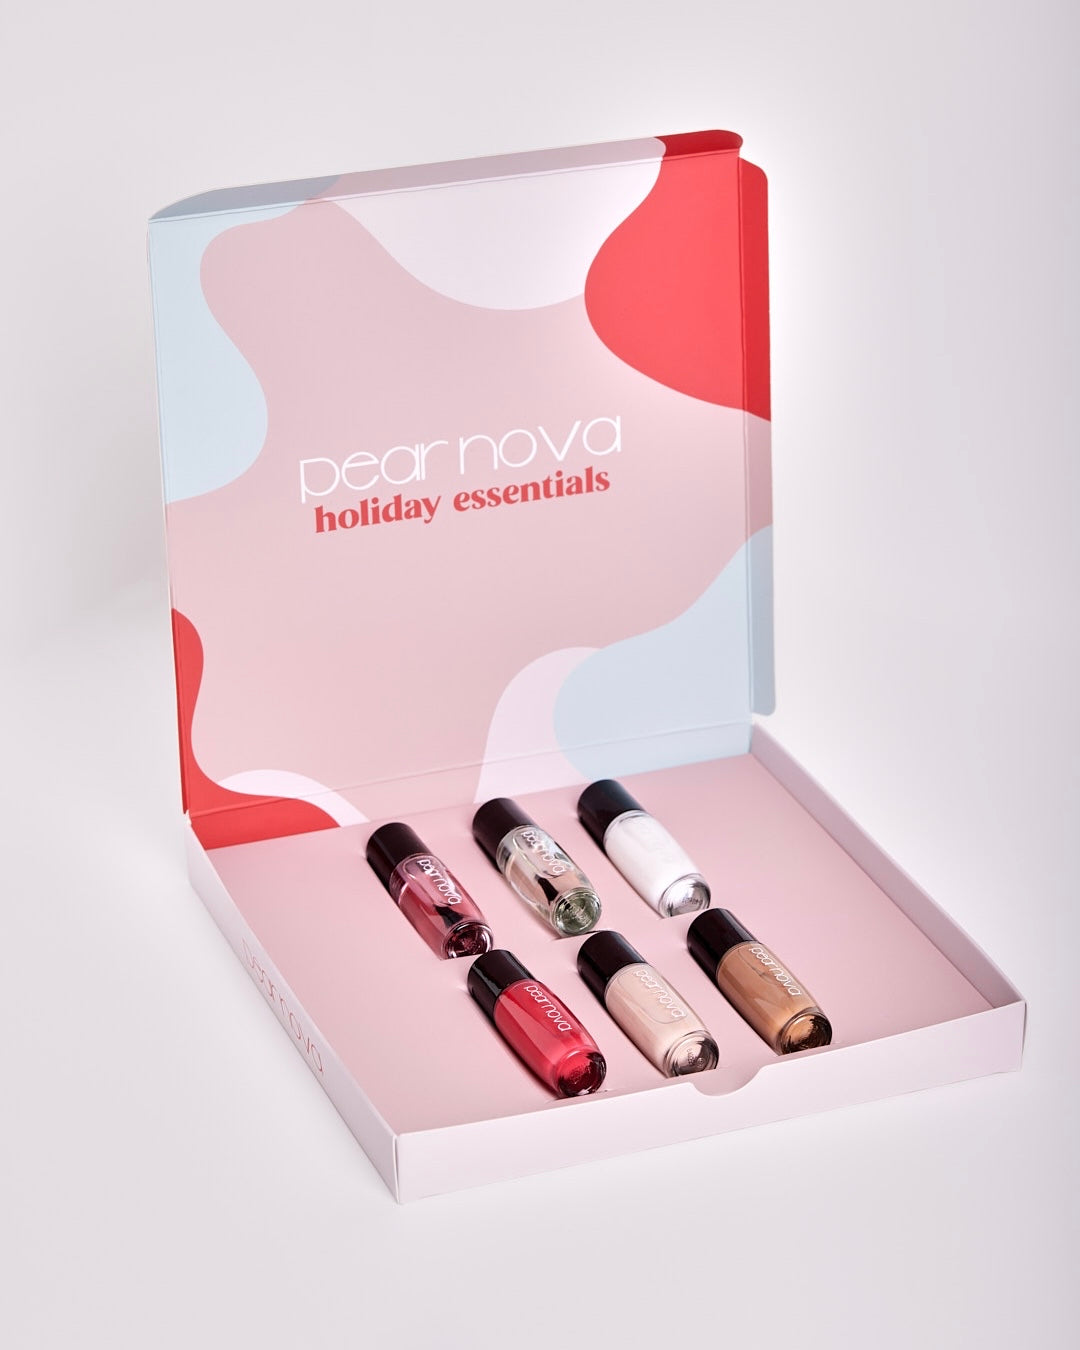 open box of holiday essentials nail set showing top coat, cuticle oil, base coat, and three nail polishes on display